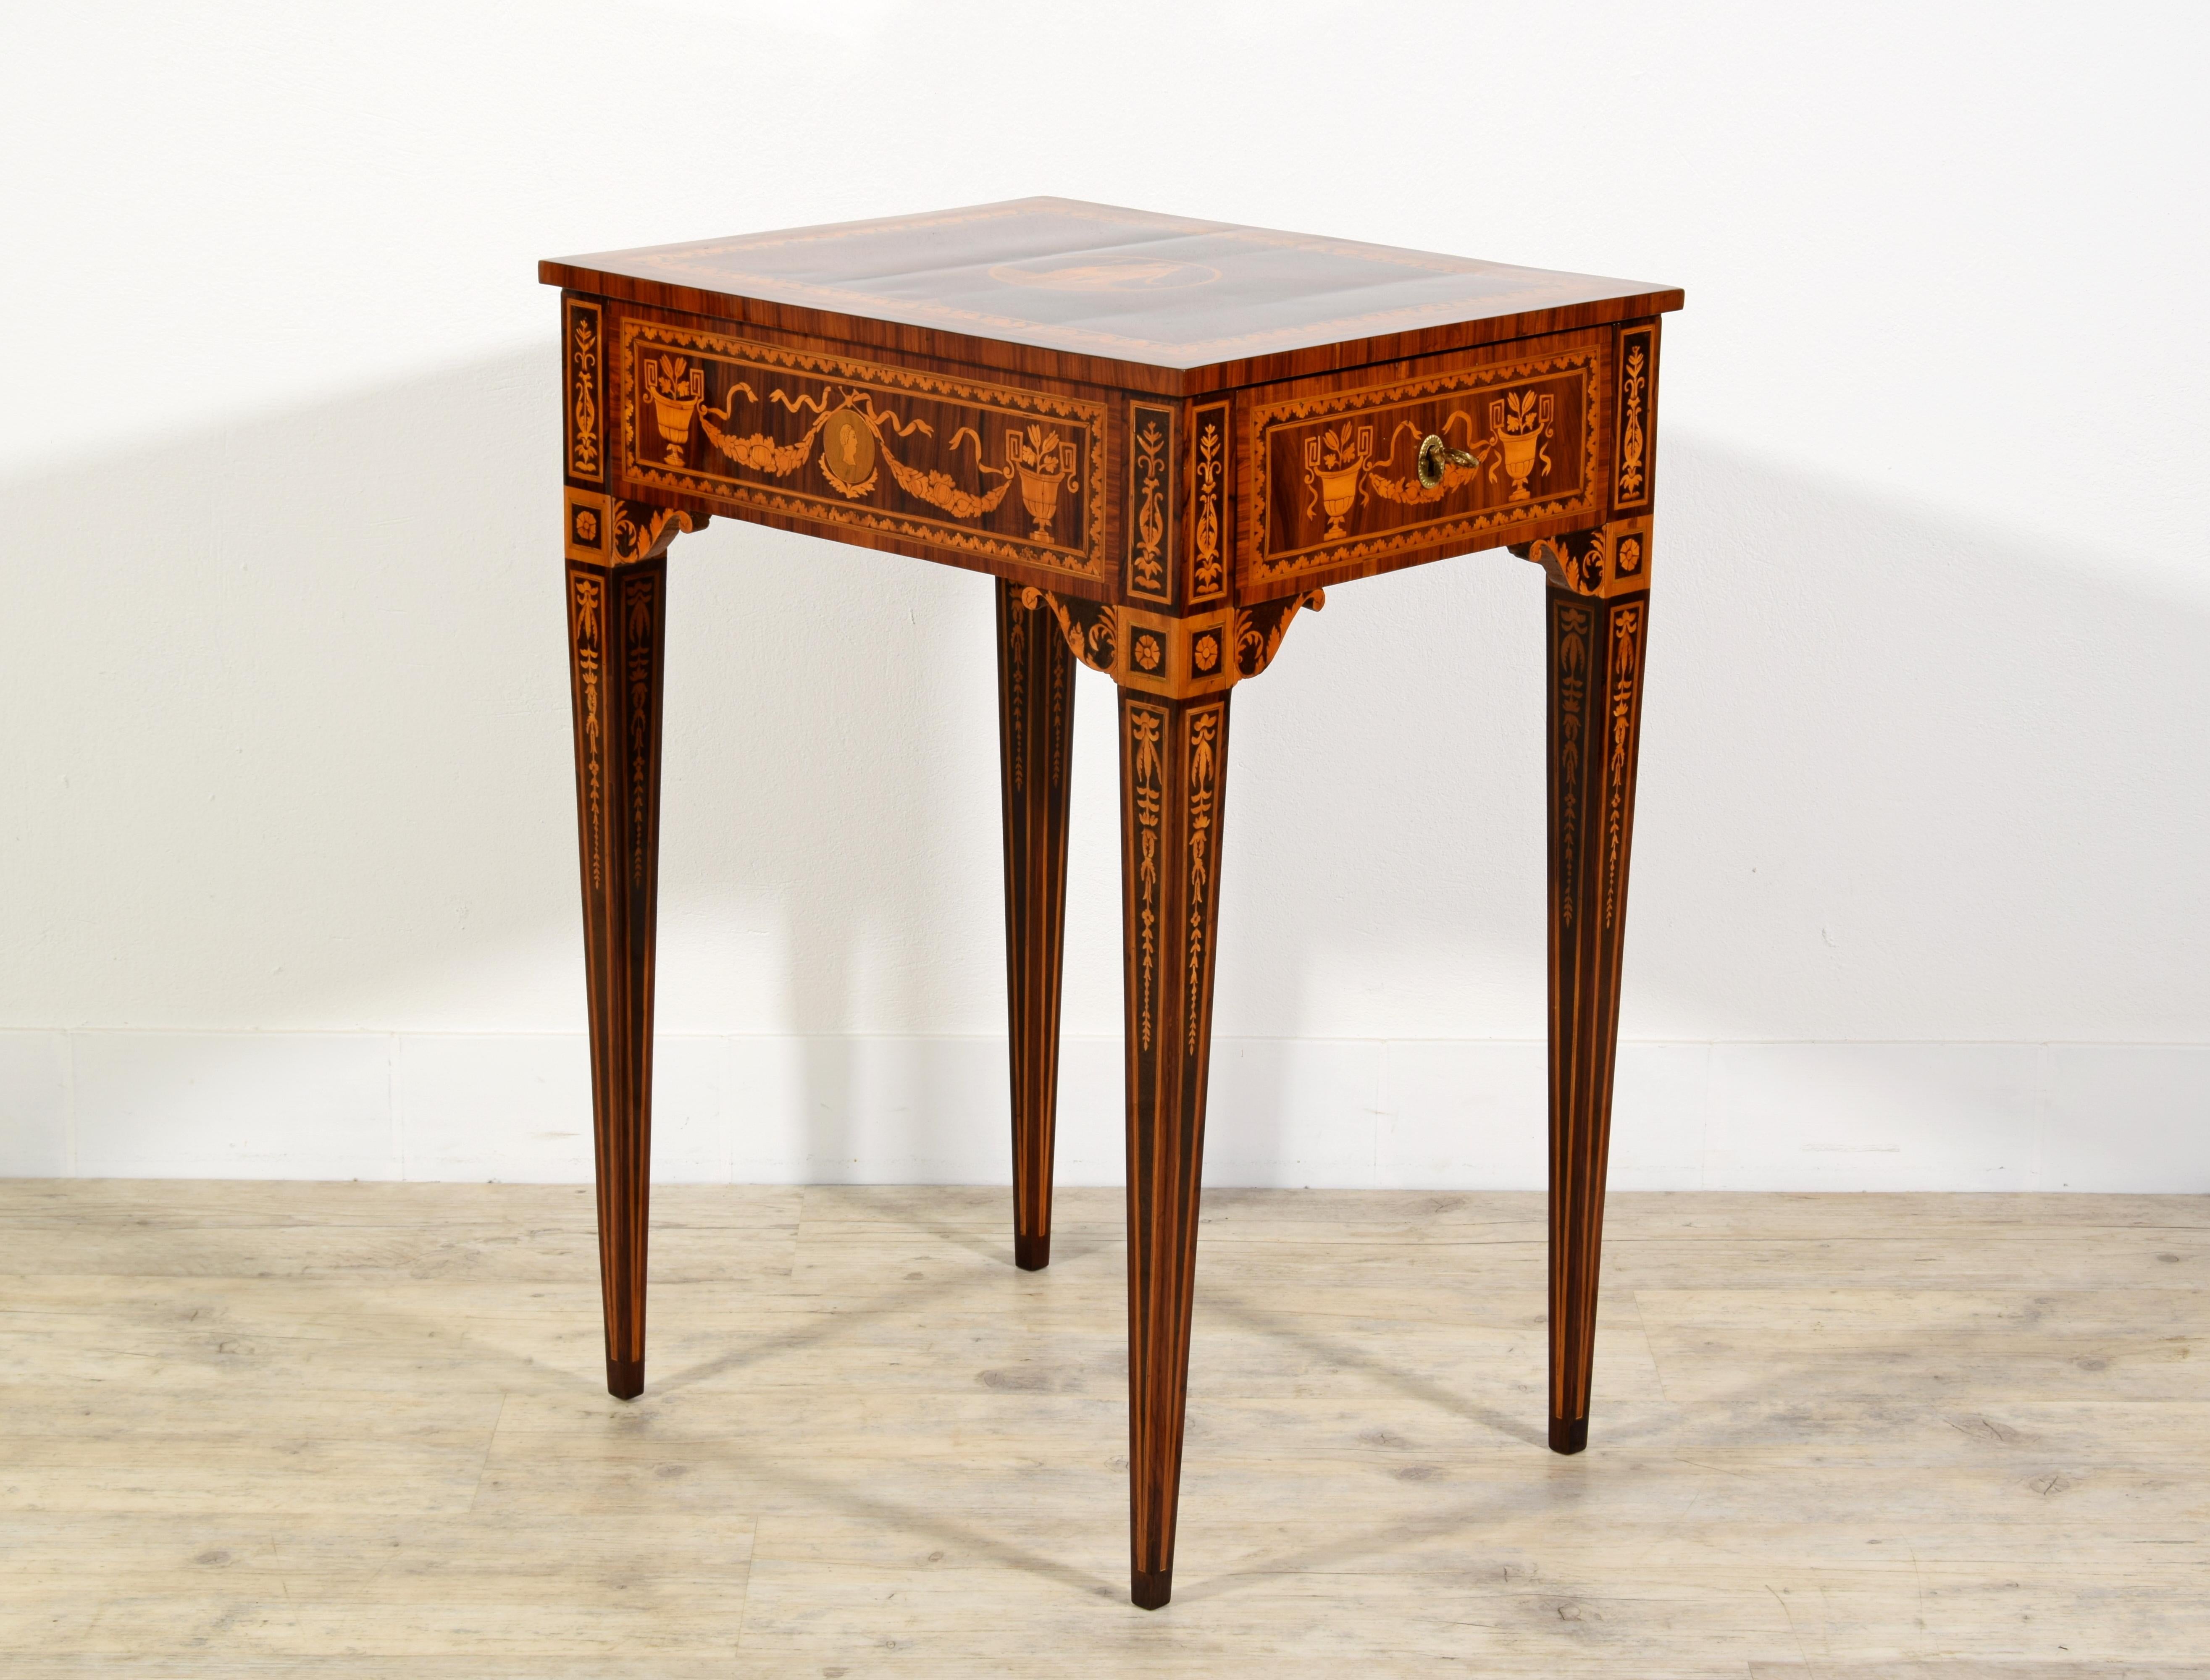 18th Century, Italian Neoclassical Inlay Wood Centre Table 
Measurements: cm W 56,5 x H 78 x D 46 (height of legs 63 cm)

This refined coffee table was made in Lombardia region (Italy) in the neoclassical period, towards the end of the eighteenth